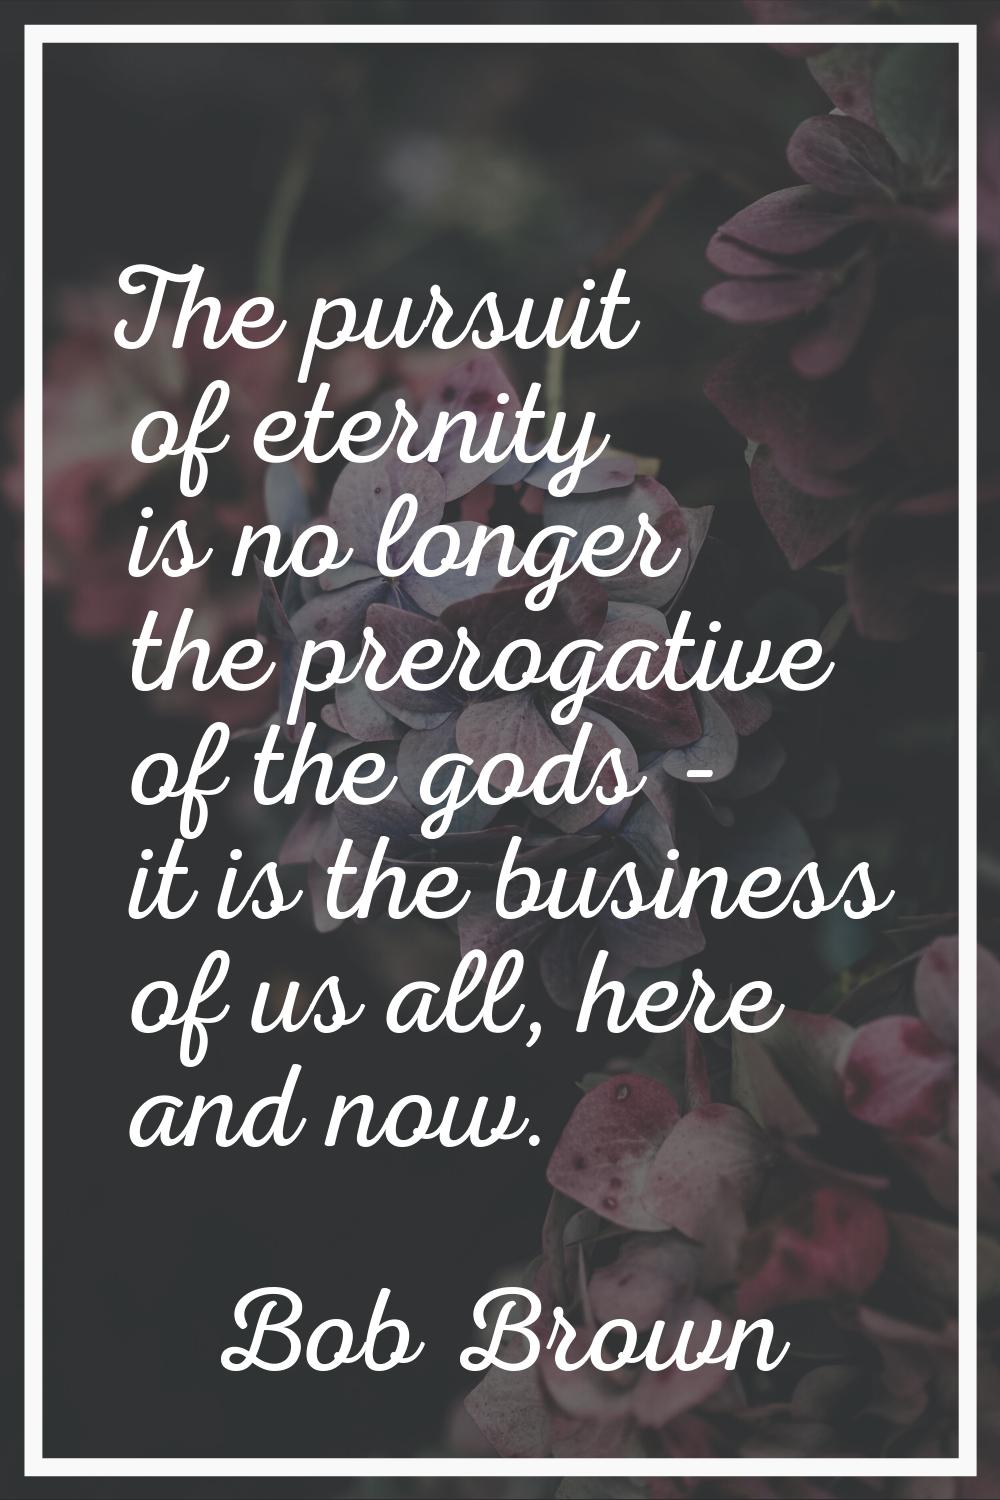 The pursuit of eternity is no longer the prerogative of the gods - it is the business of us all, he